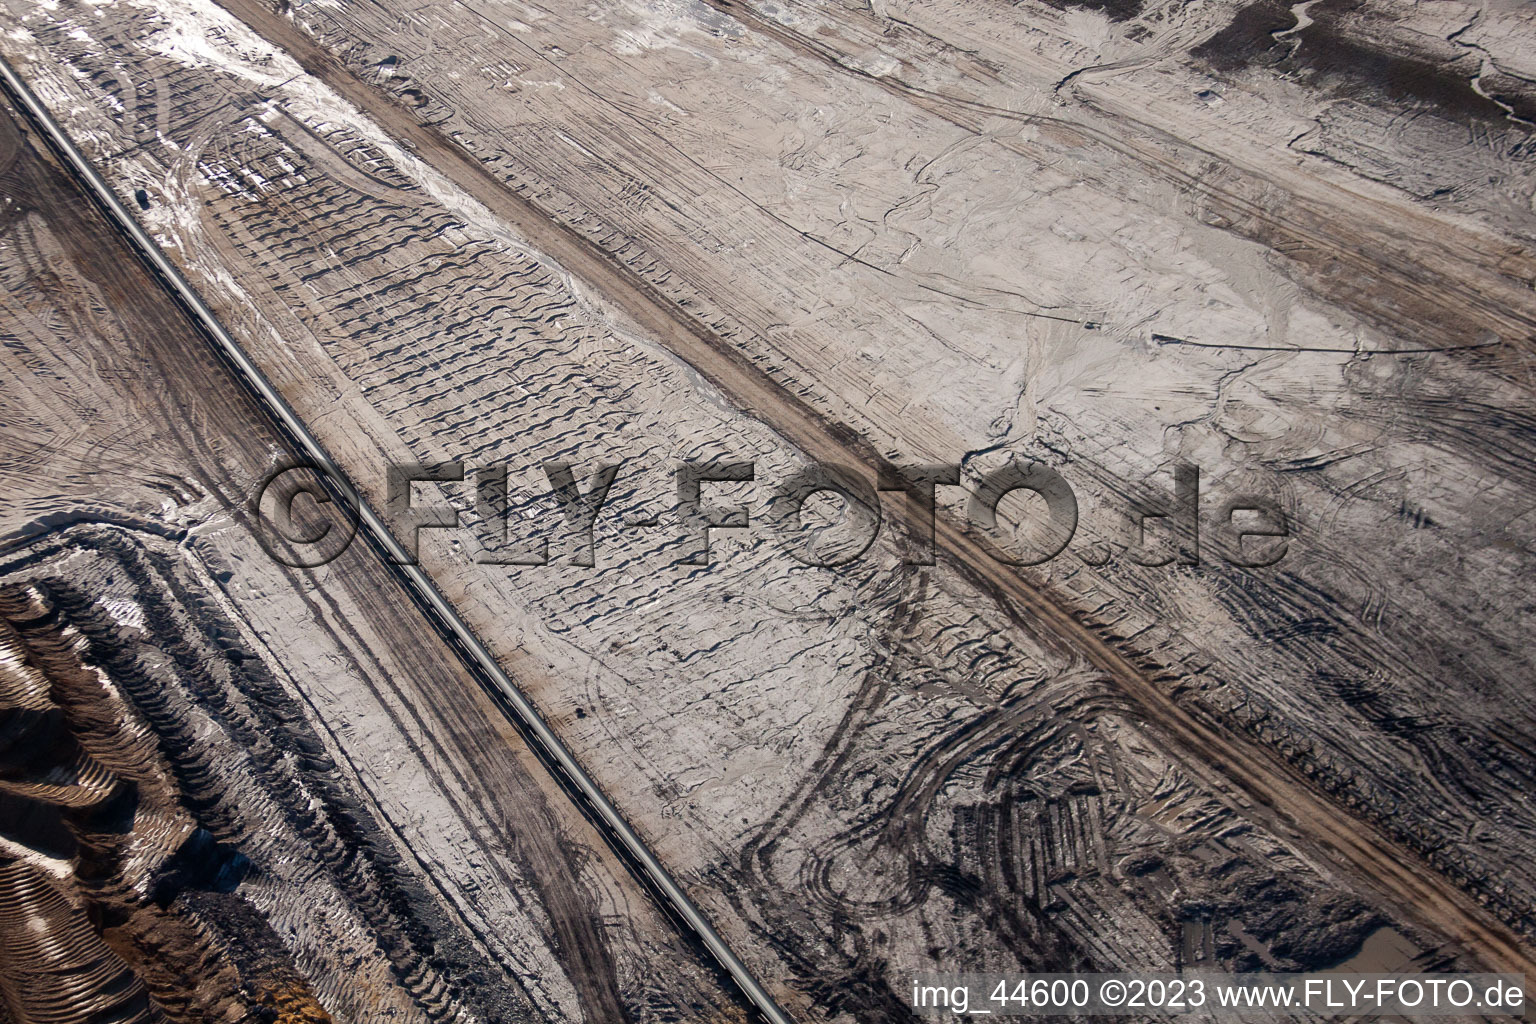 Opencast brown coal mining in Inden in the state North Rhine-Westphalia, Germany from above